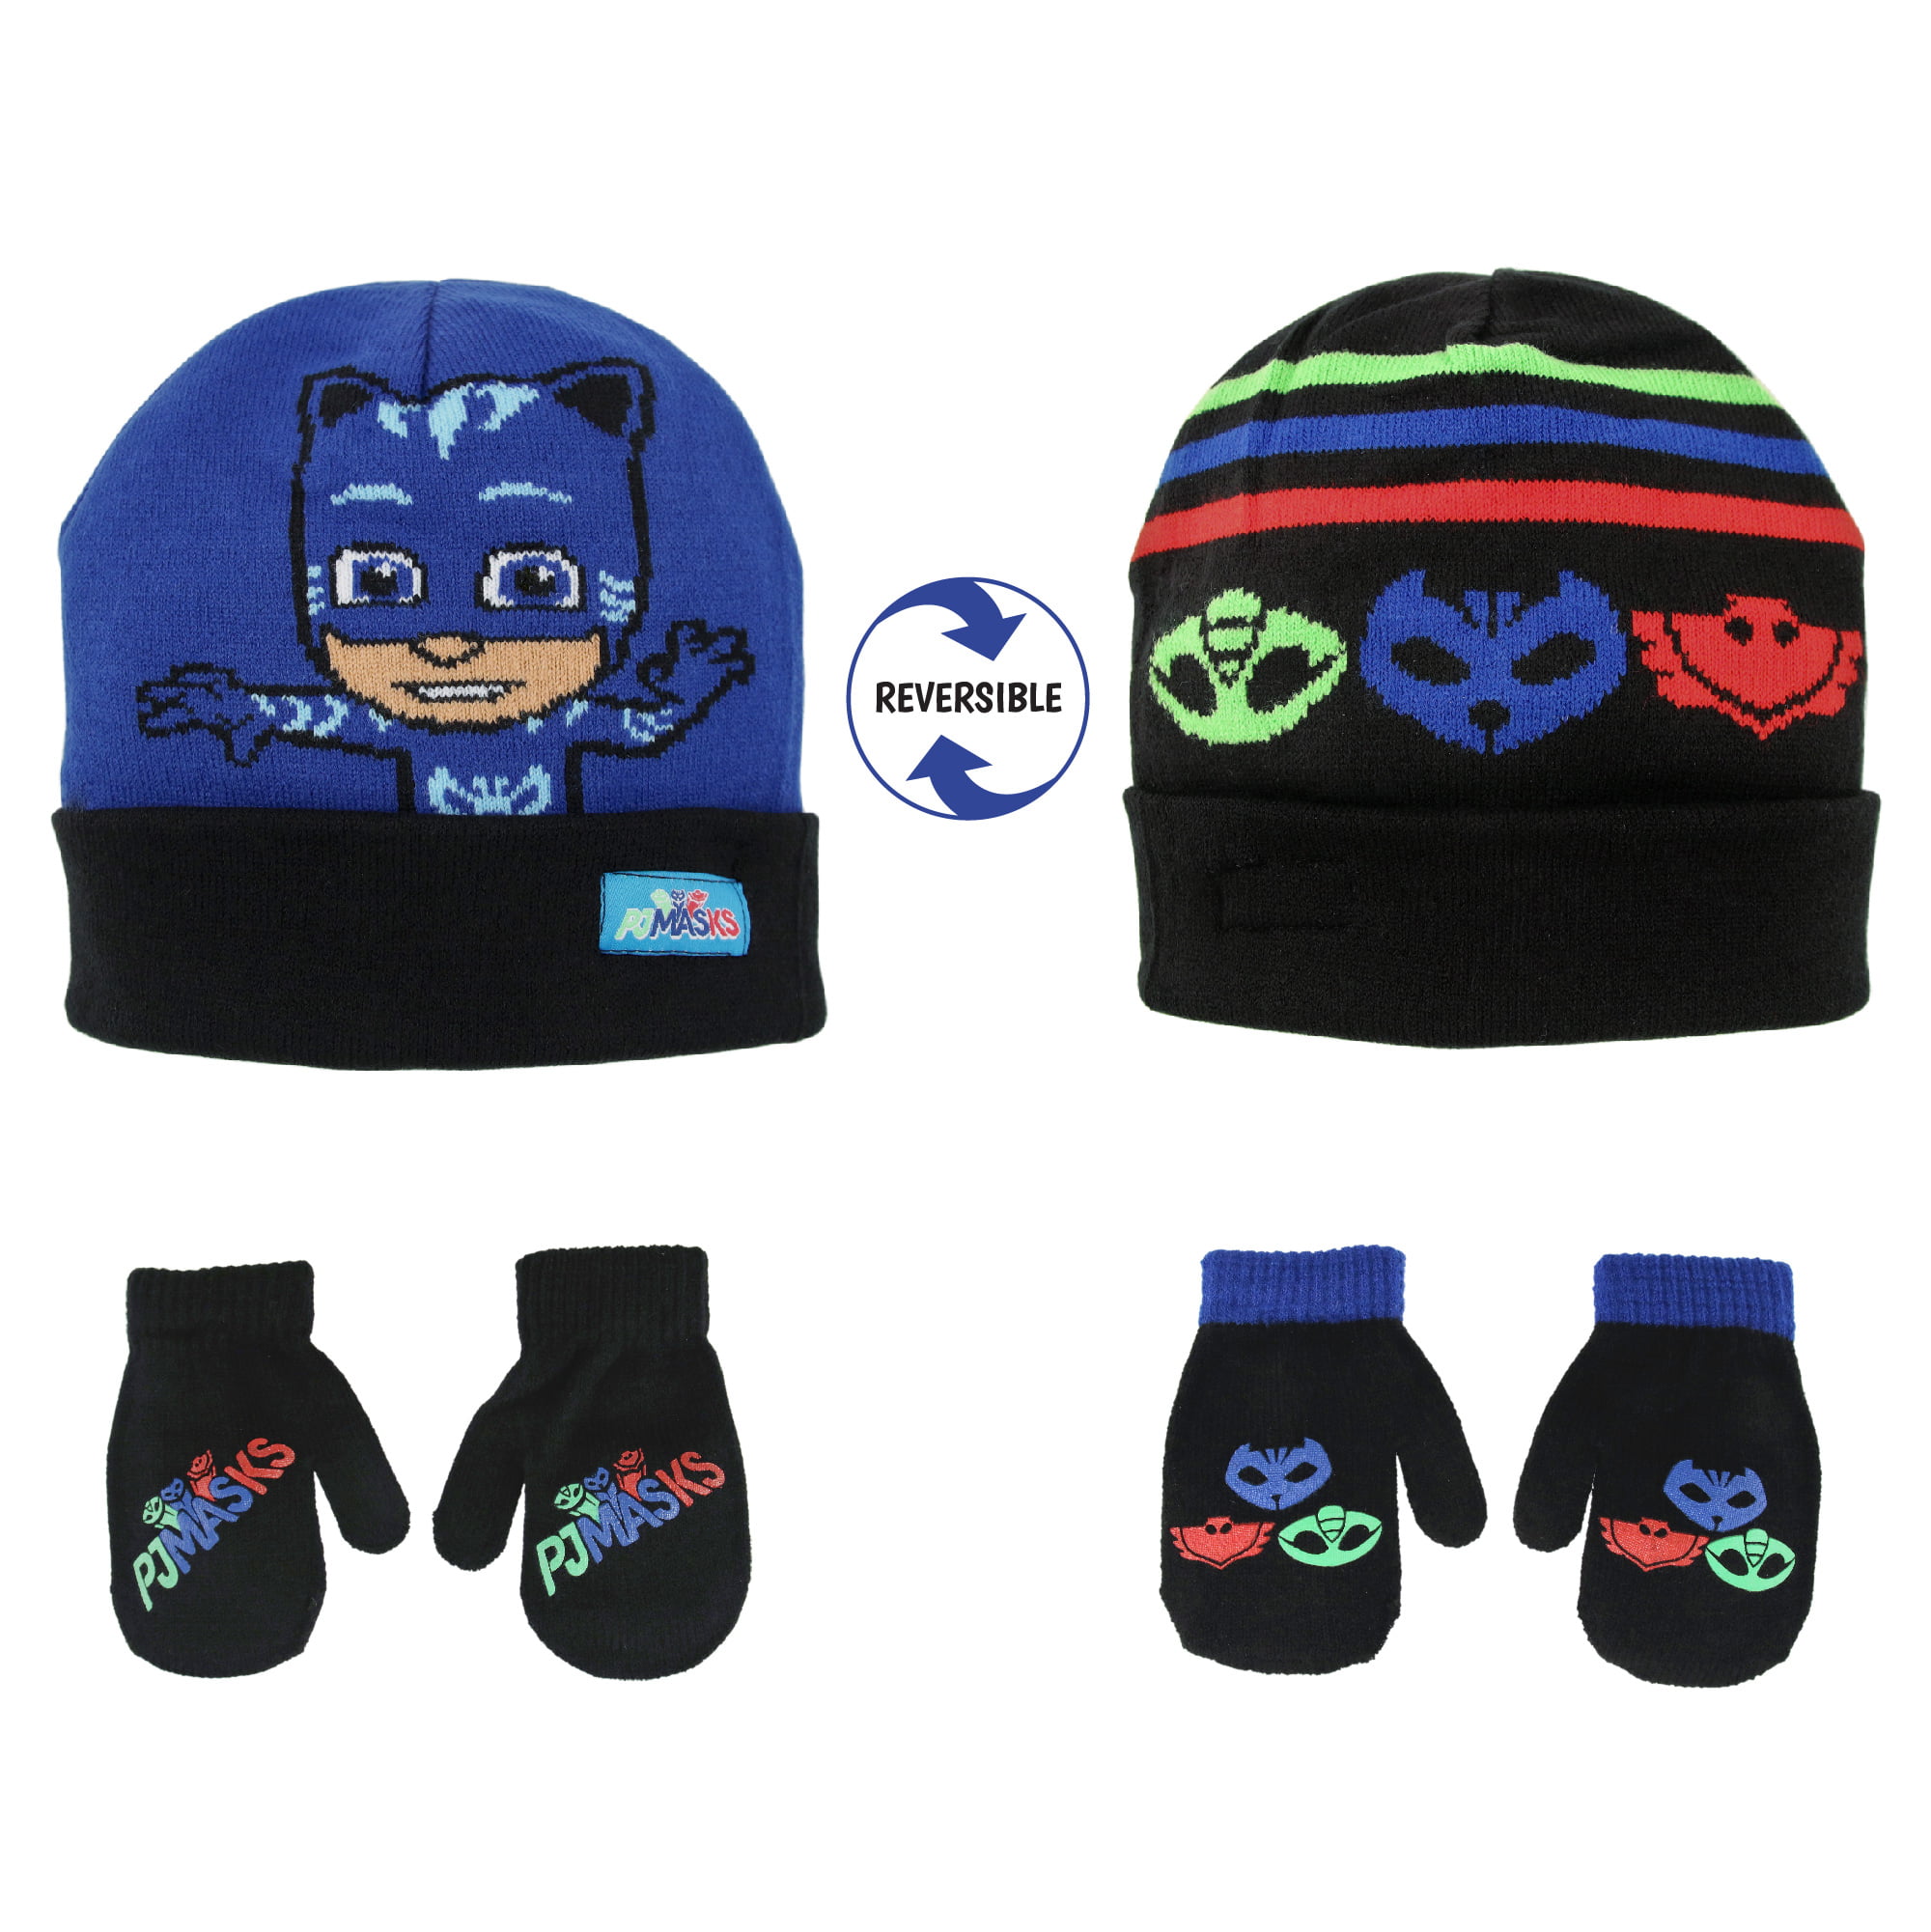 Royal Blue/Black, Little Boys, Ages 4-7 Toddler Boys PJ Masks Reversible Hat and 2 Pair Mitten or Glove Cold Weather Set Age 2-4 or Little Boys Age 4-7 